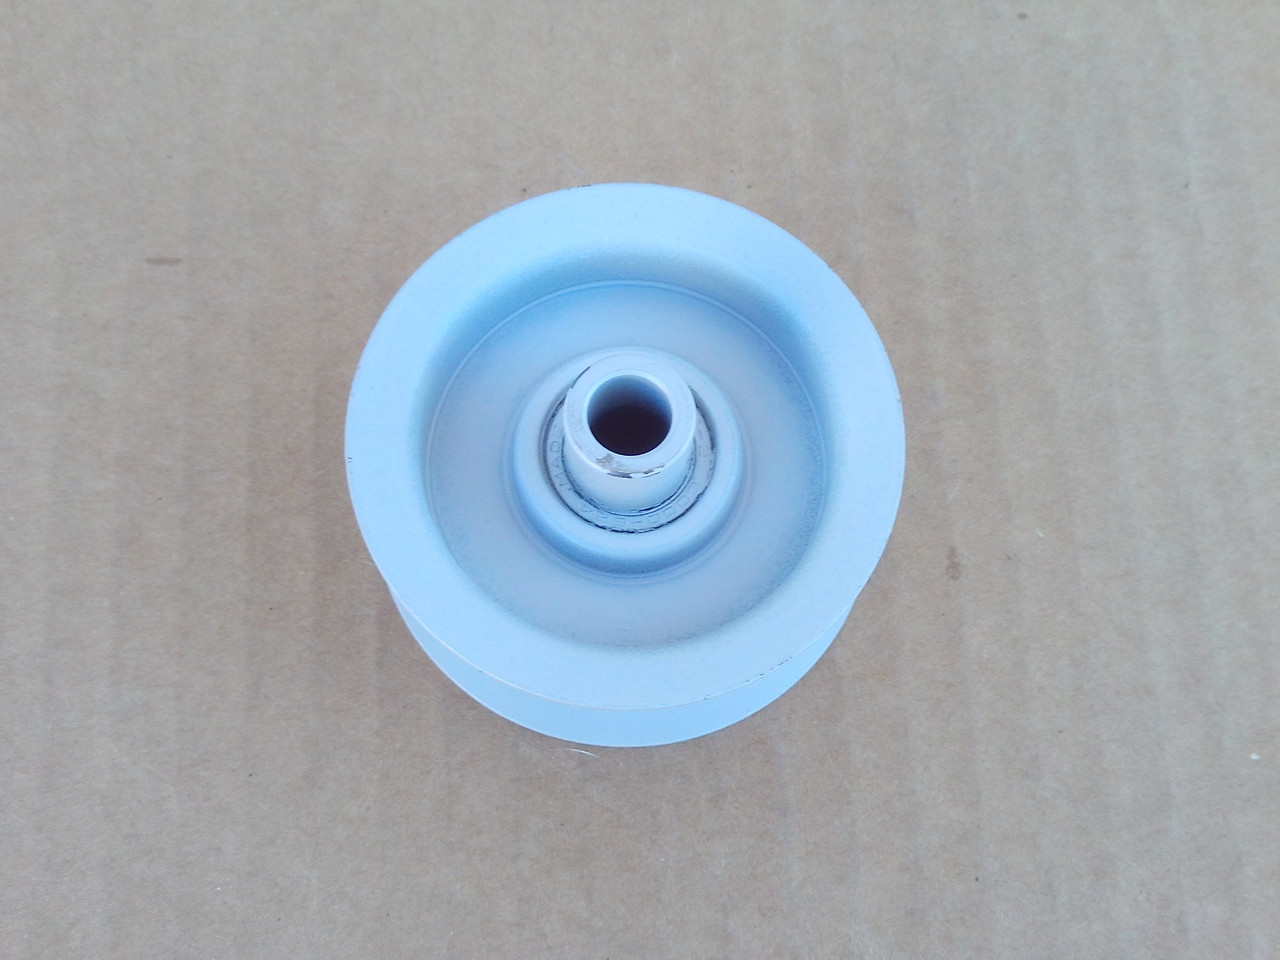 Idler Pulley for Snapper 14340, 7014340, 7014340YP, 1-4340, Height: 1", ID: 3/8", OD: 2-1/2"